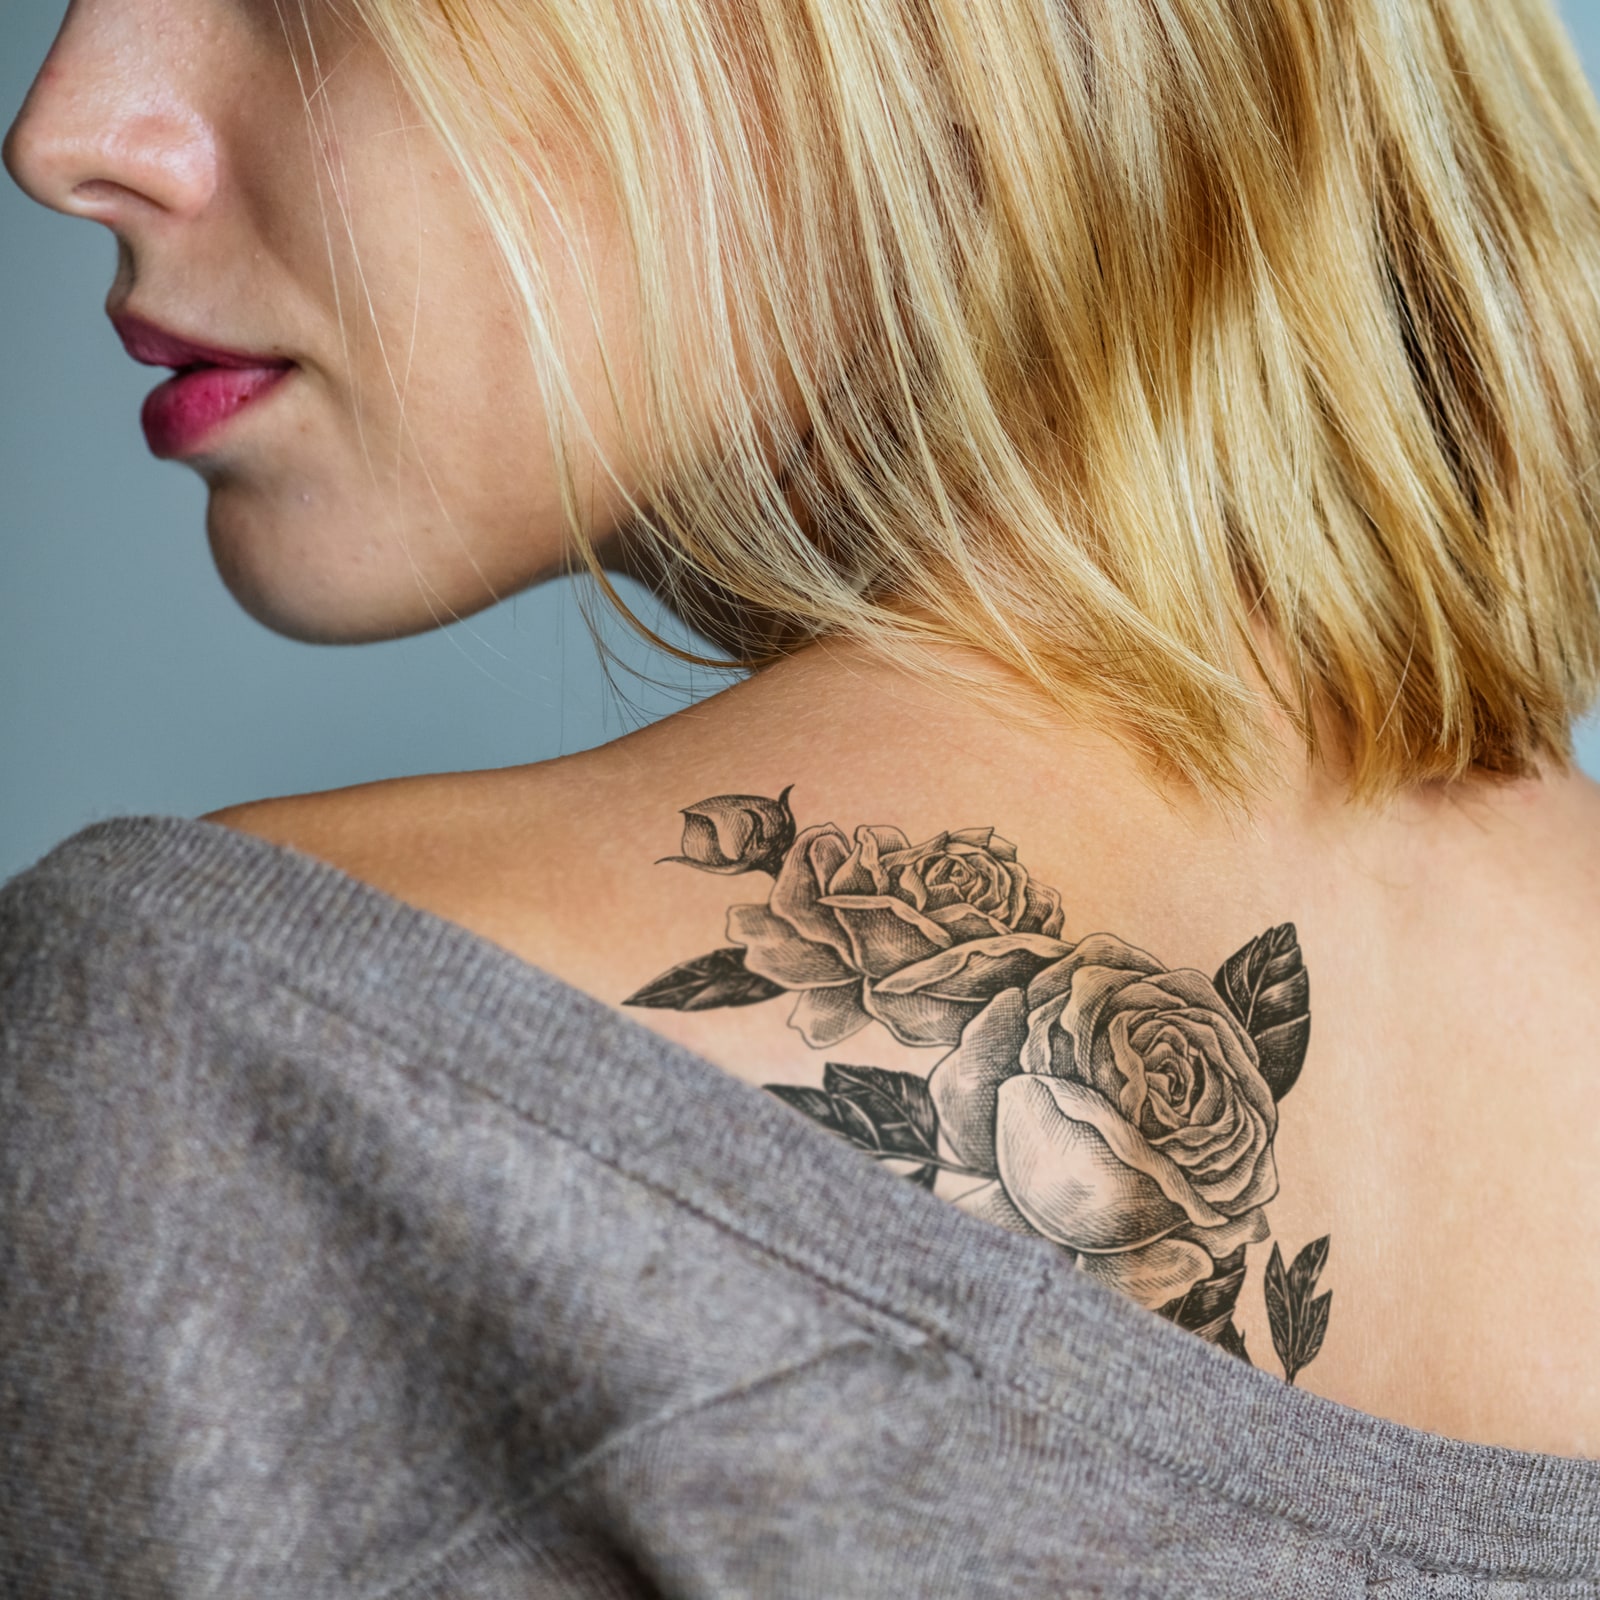 Can tattoo ink cause cancer Study finds link between the two